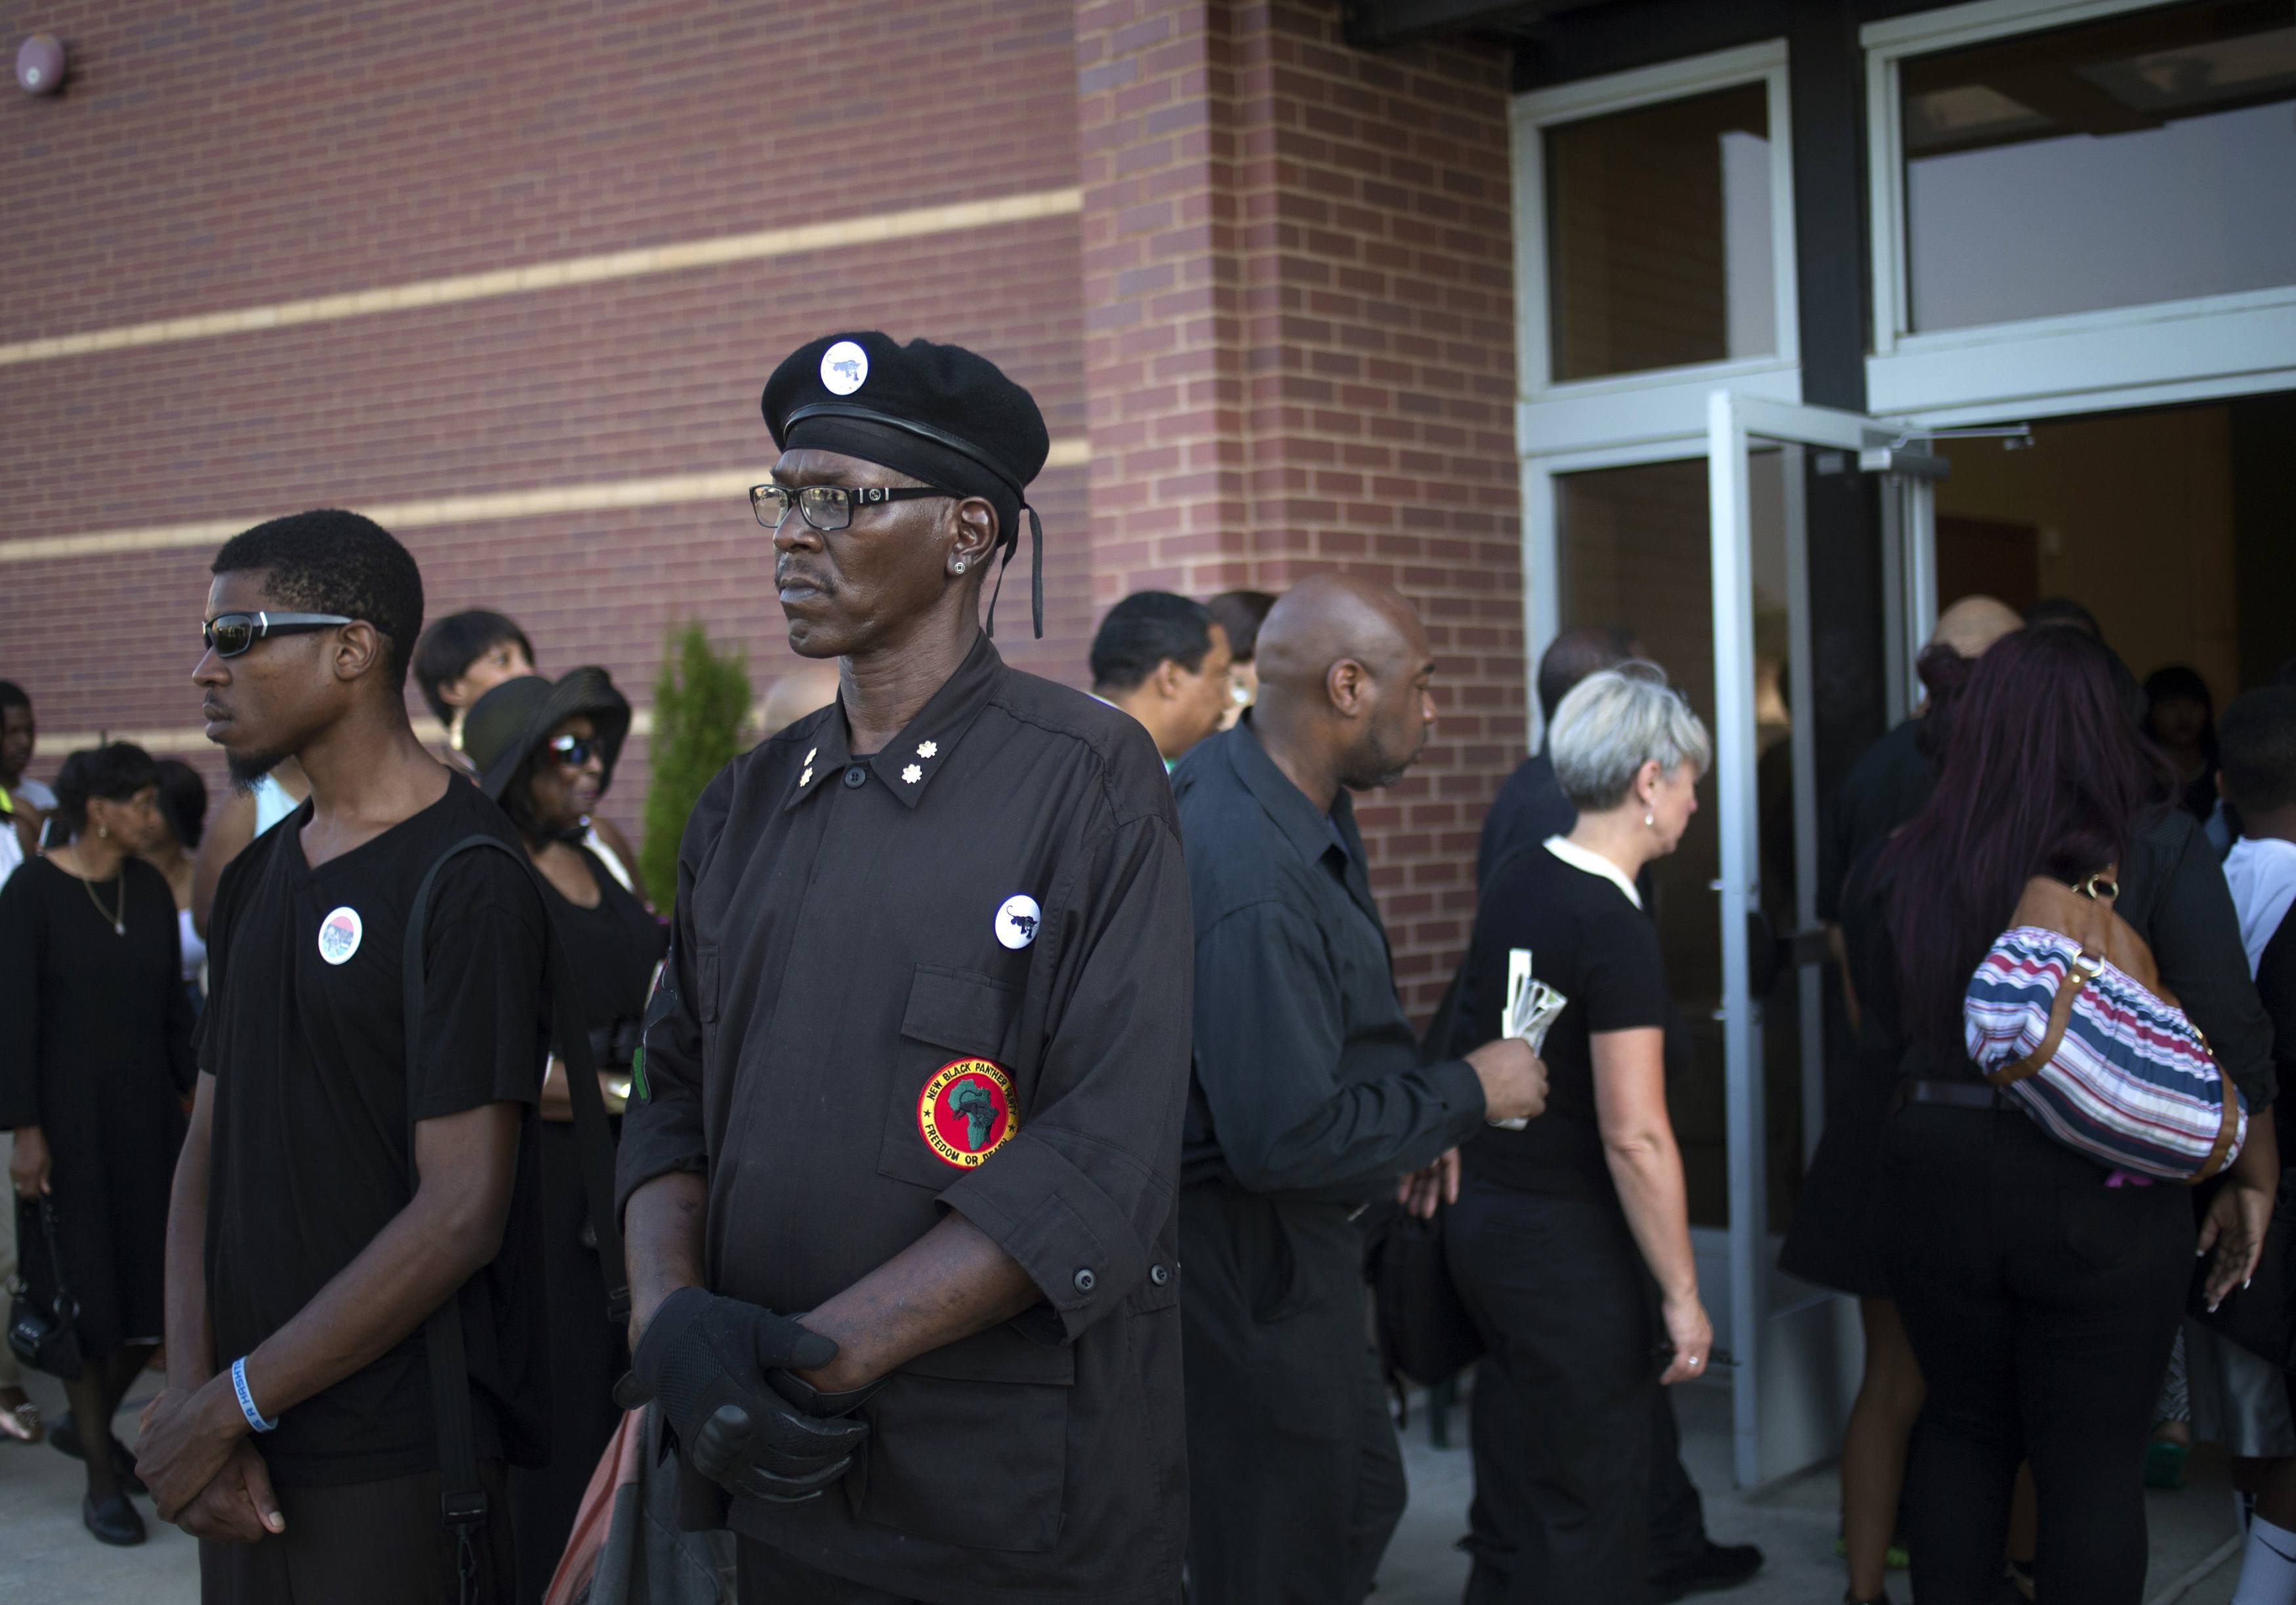 Members of the New Black Panther Party for Self-Defense (NBPP) stand guard in front of the Friendly Temple Missionary Baptist Church in St. Louis on Aug. 25, 2014.